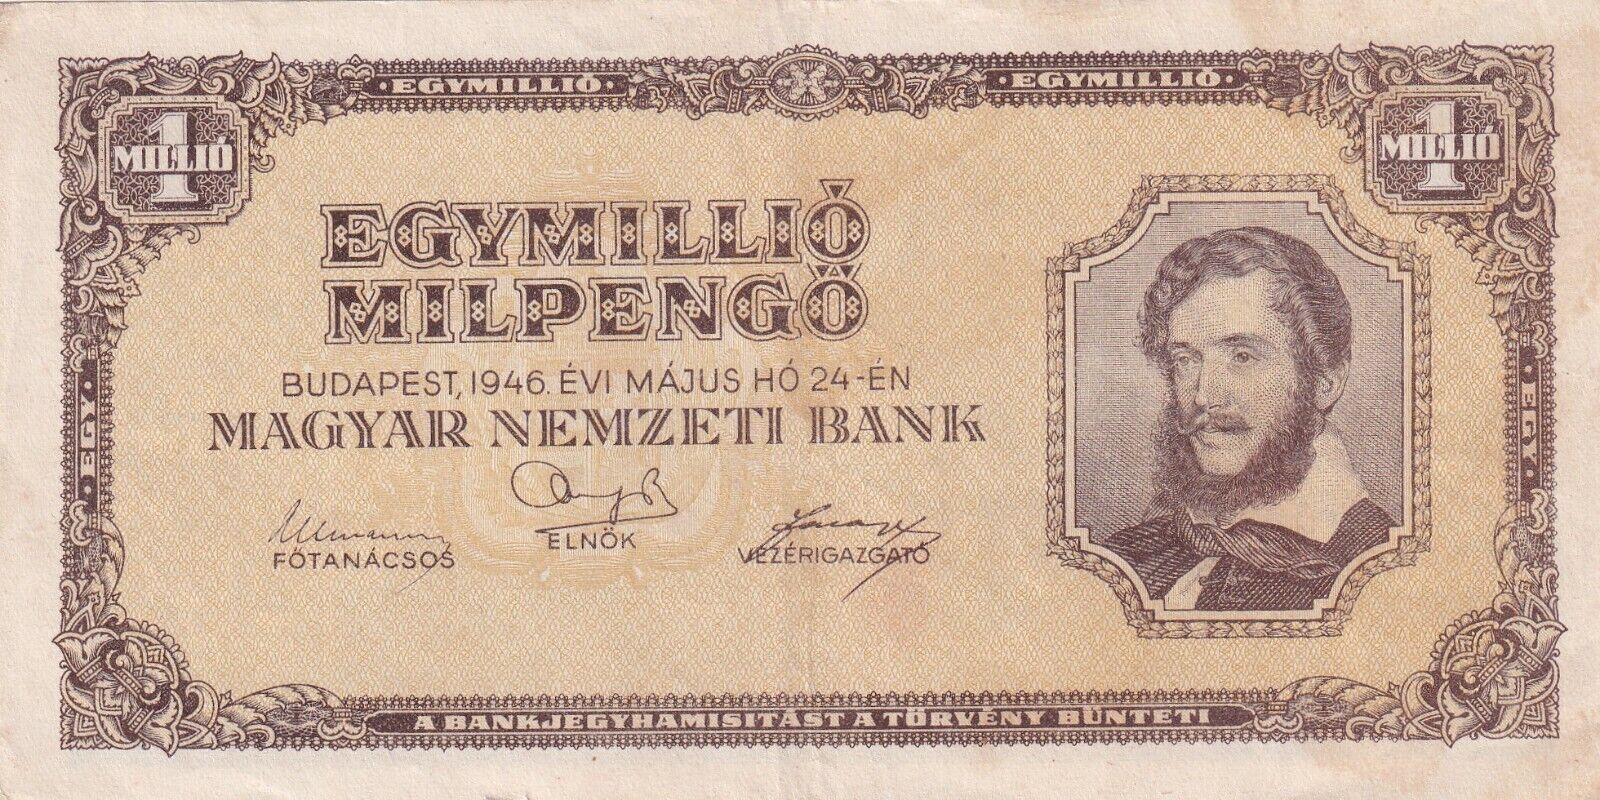 Hungary Max 71% OFF 1 000 New Free Shipping Milpengo 1946